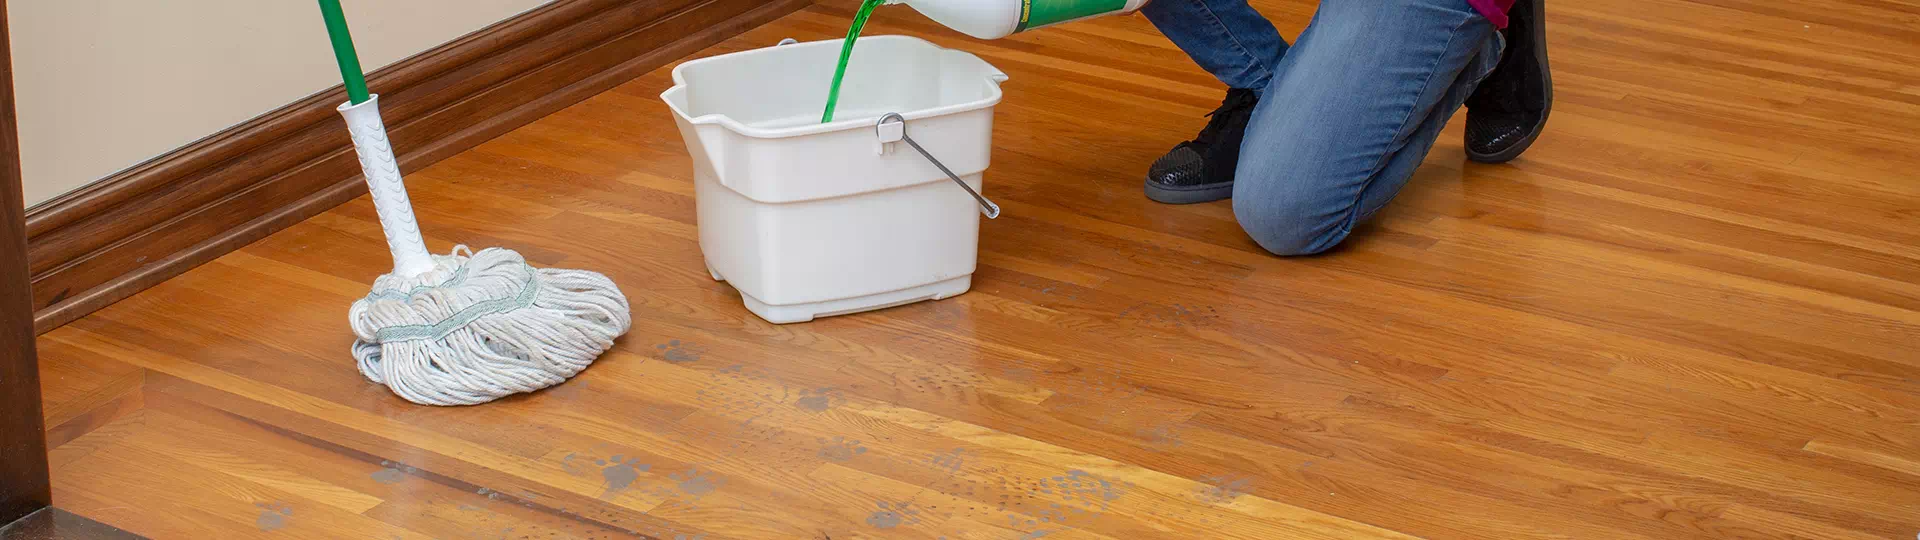 How To Clean Hardwood Floors Simple Green, Is Simple Green Safe For Laminate Floors